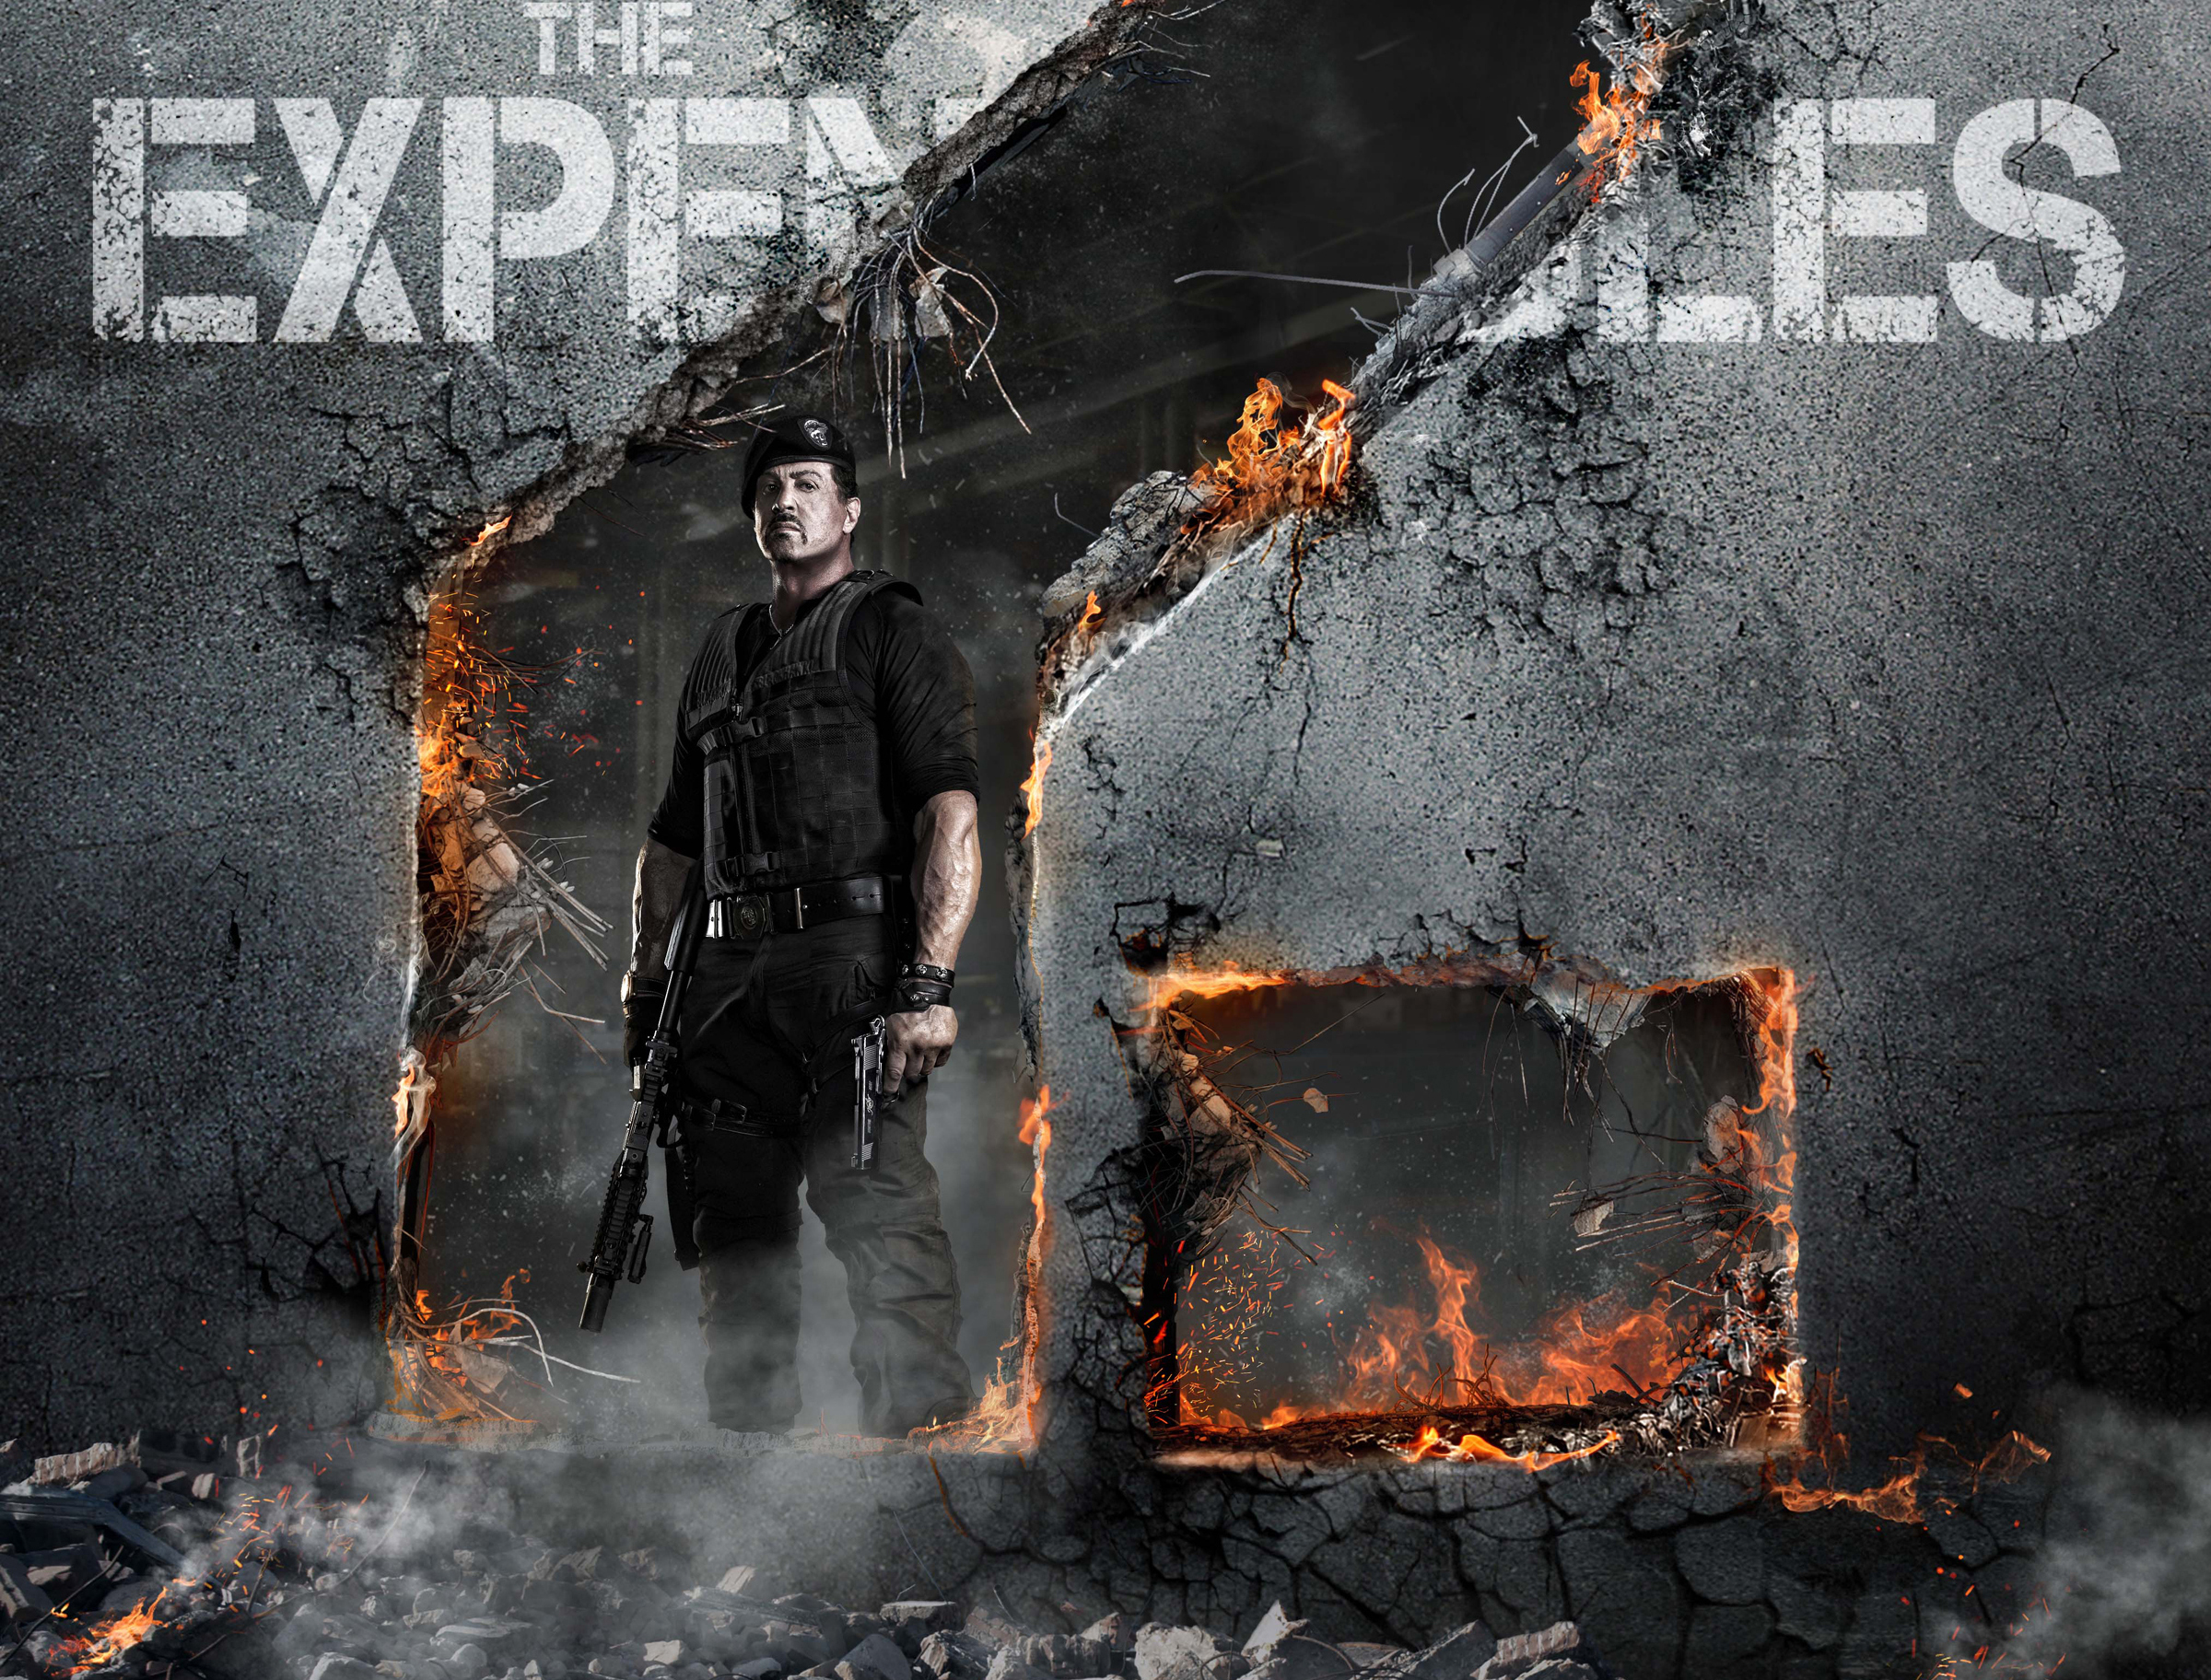 Movie The Expendables 2 HD Wallpaper